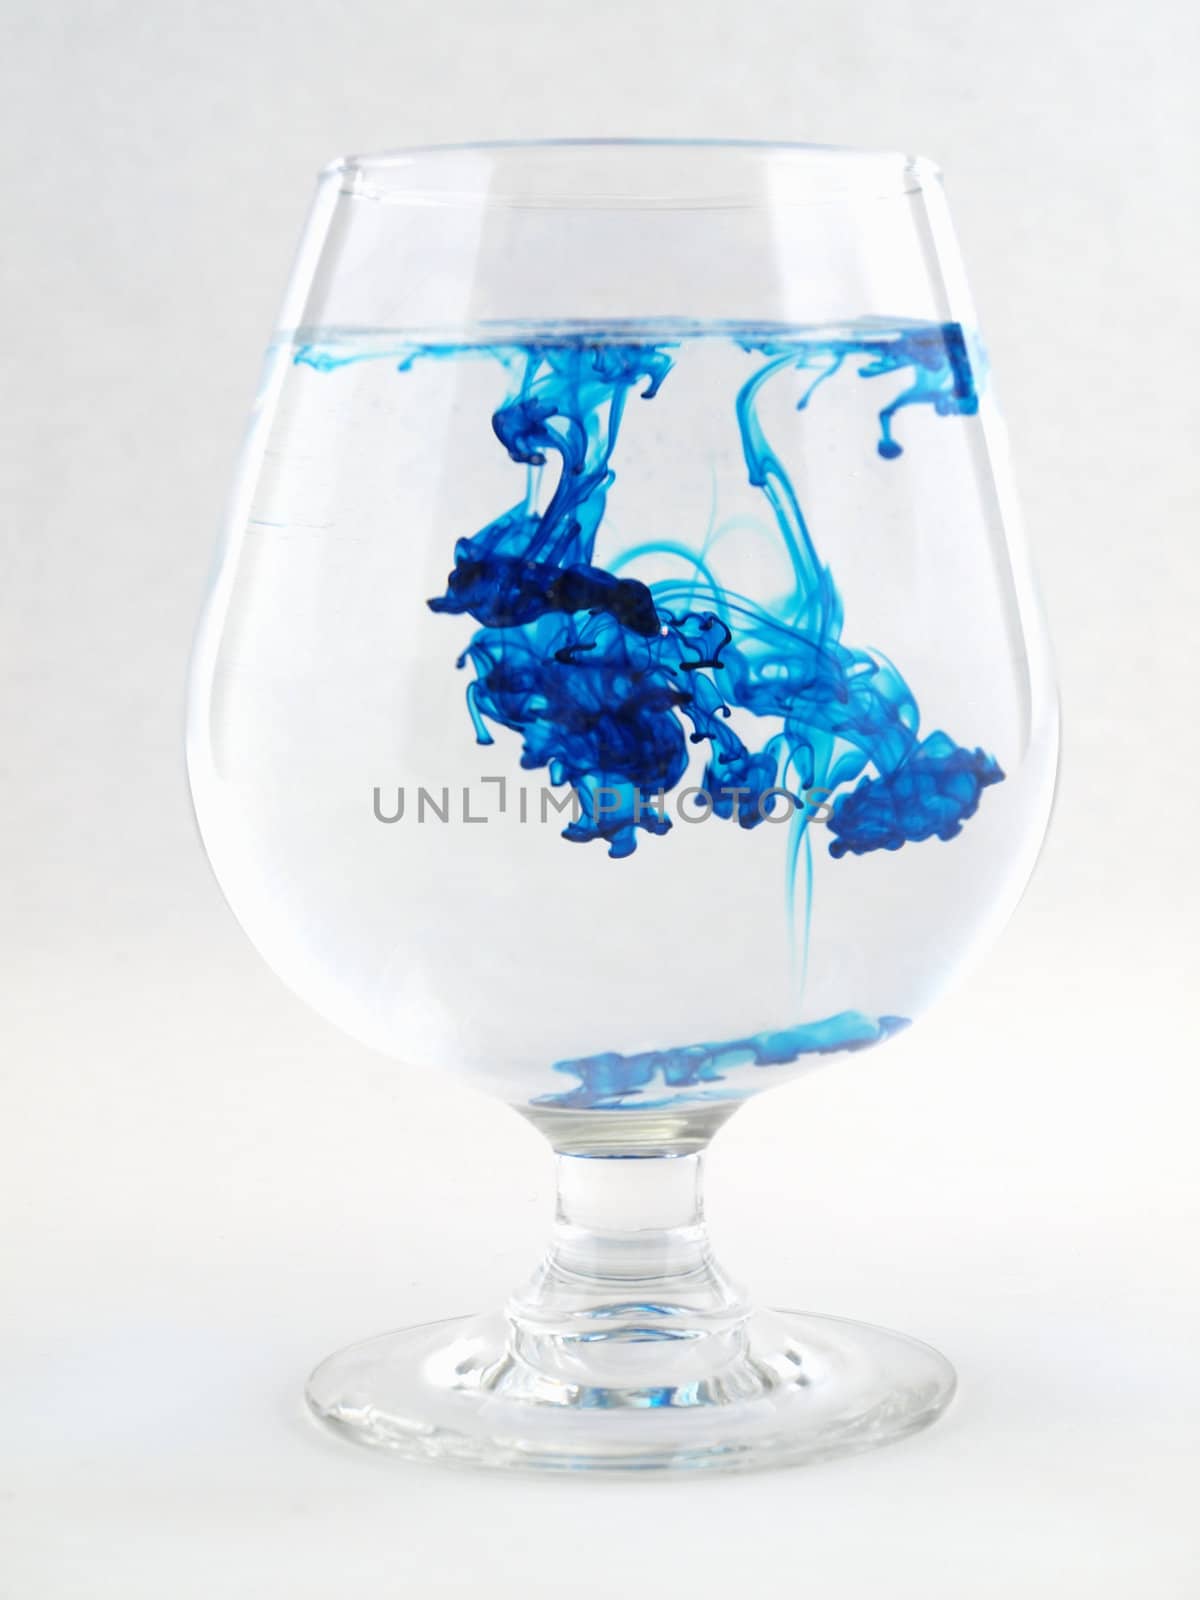 A liquid filled glass with blue swirls over a white background.